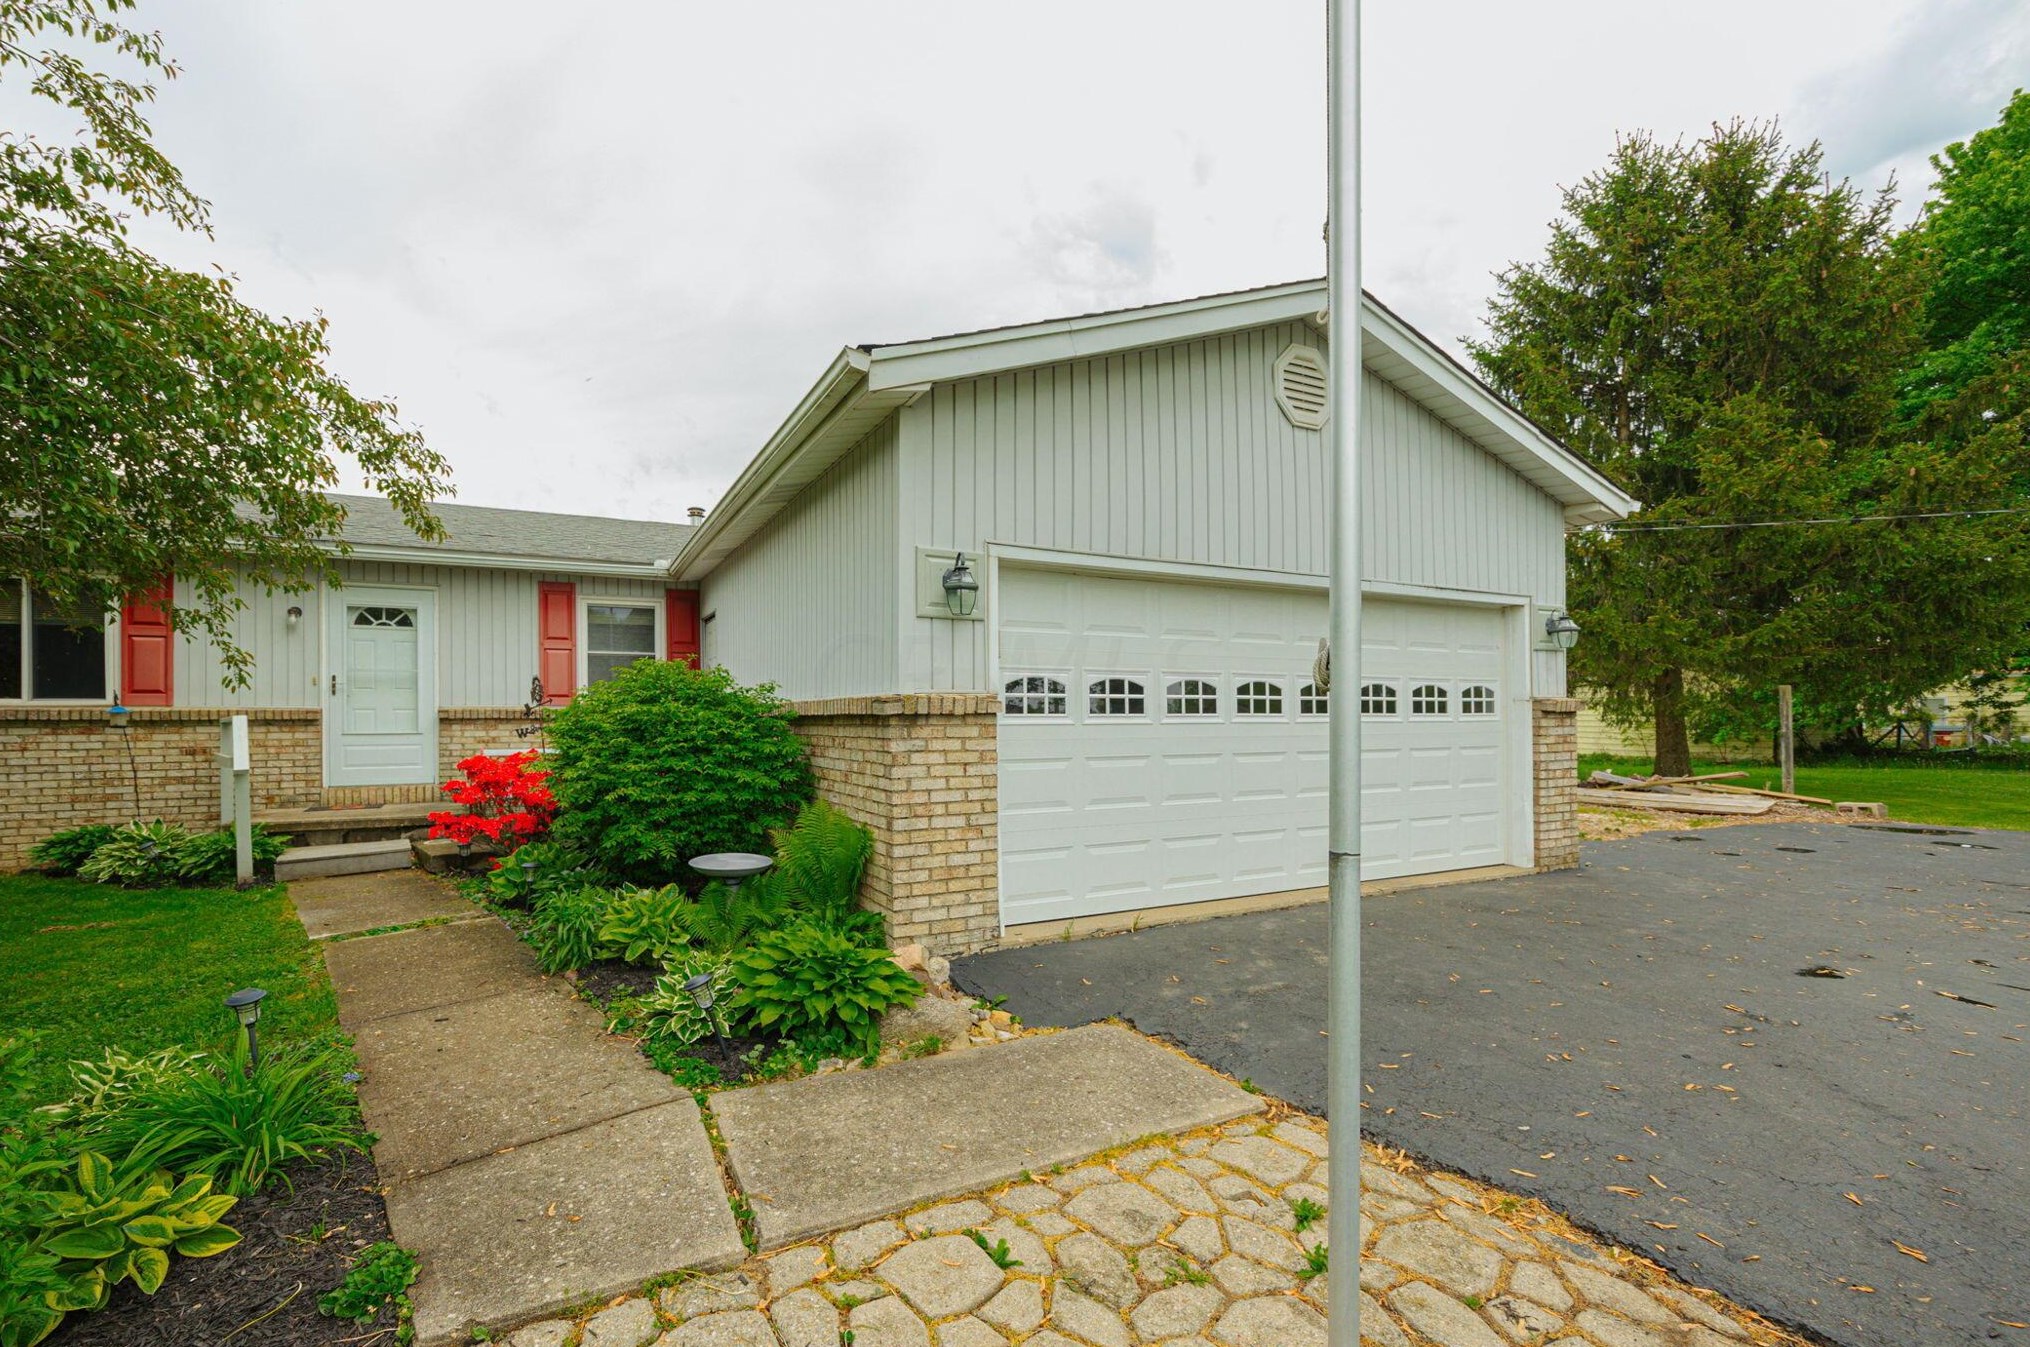 11352 Duncan Plains Nw Rd, Johnstown, OH 43031